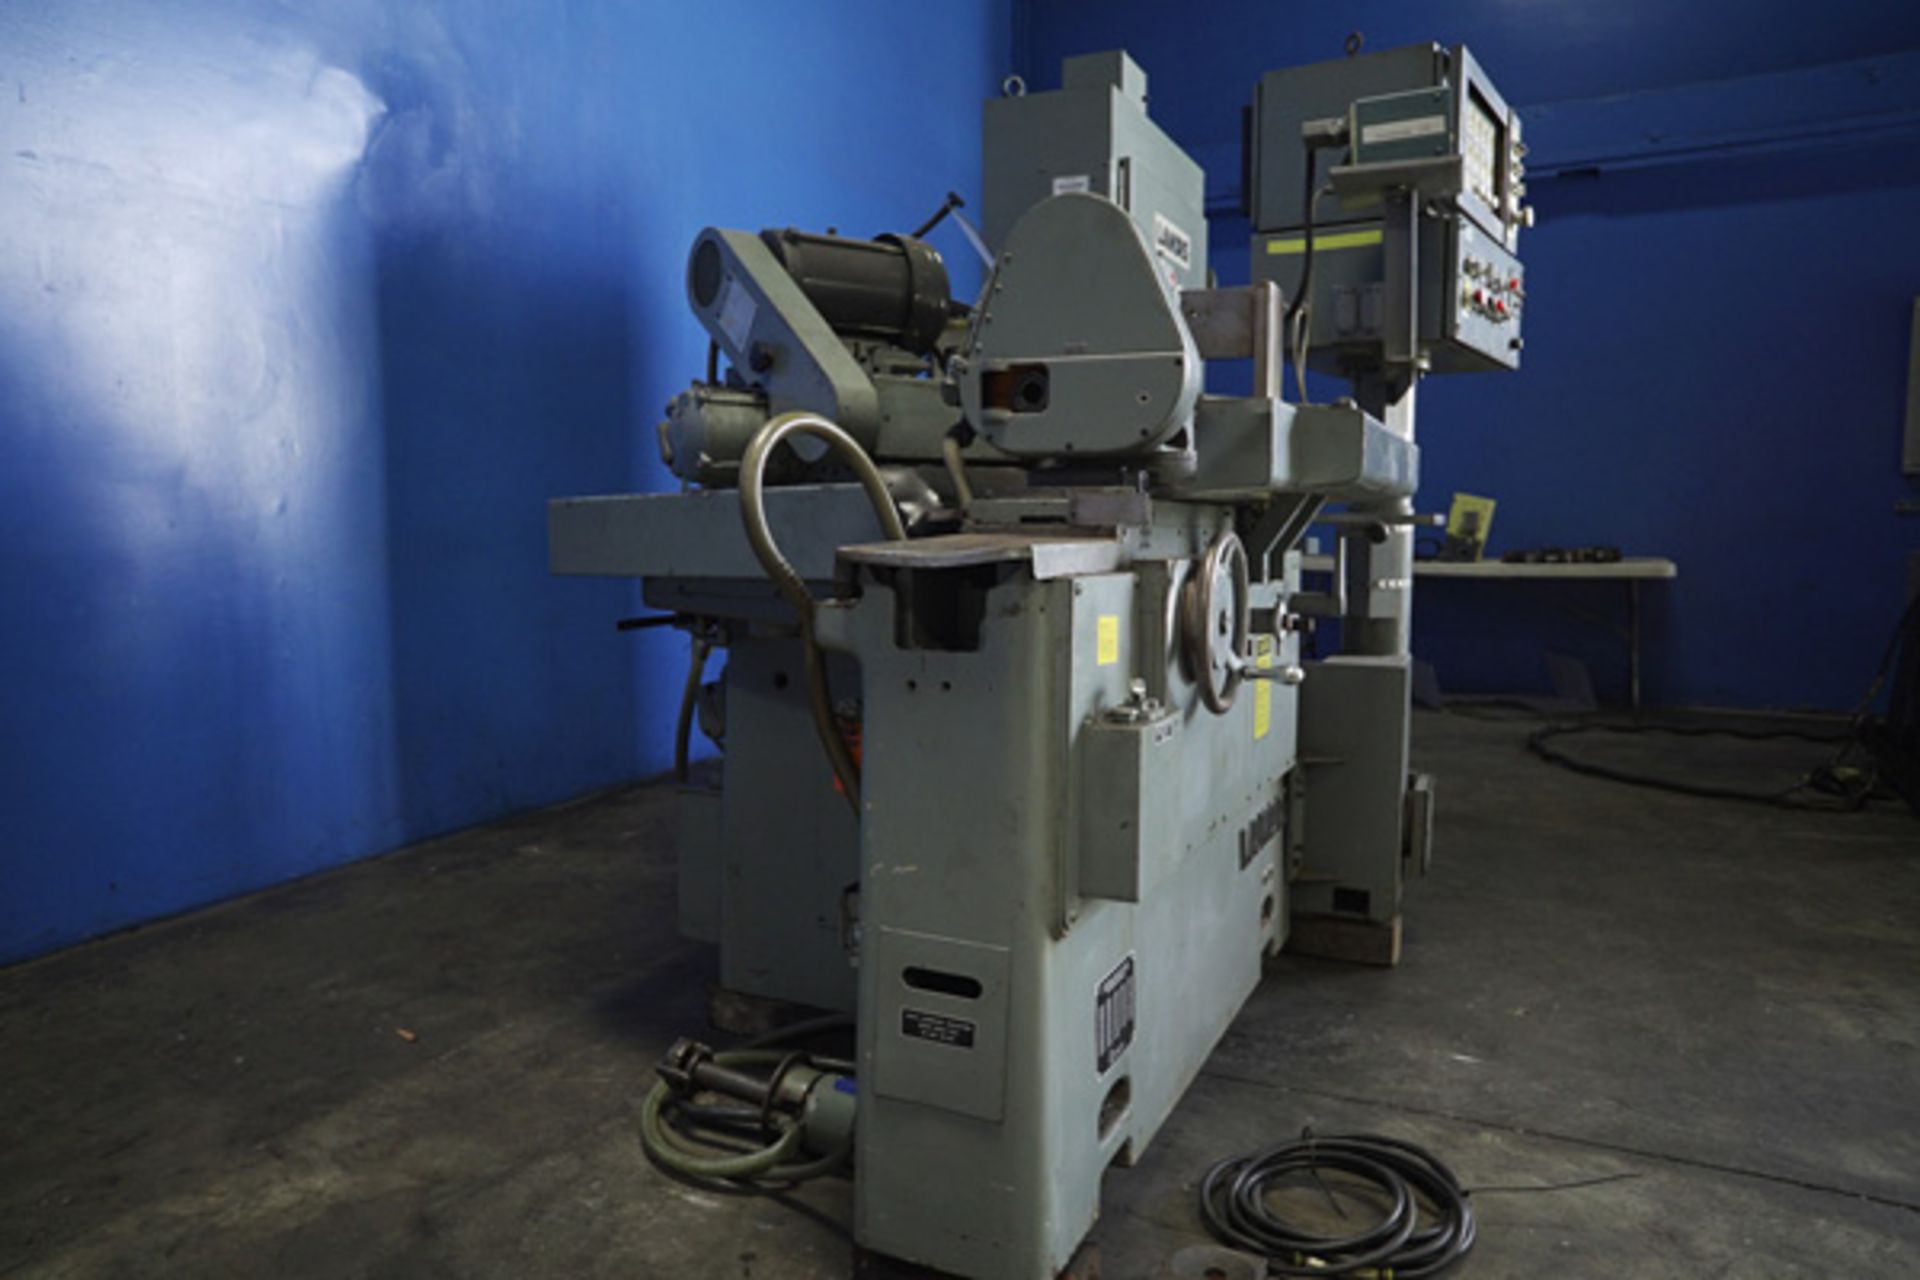 1973 Landis Angle Head Cylindrical Grinder | 10" x 20", Mdl: 1R, S/N: T-884-73 - 5040HP - Image 4 of 9